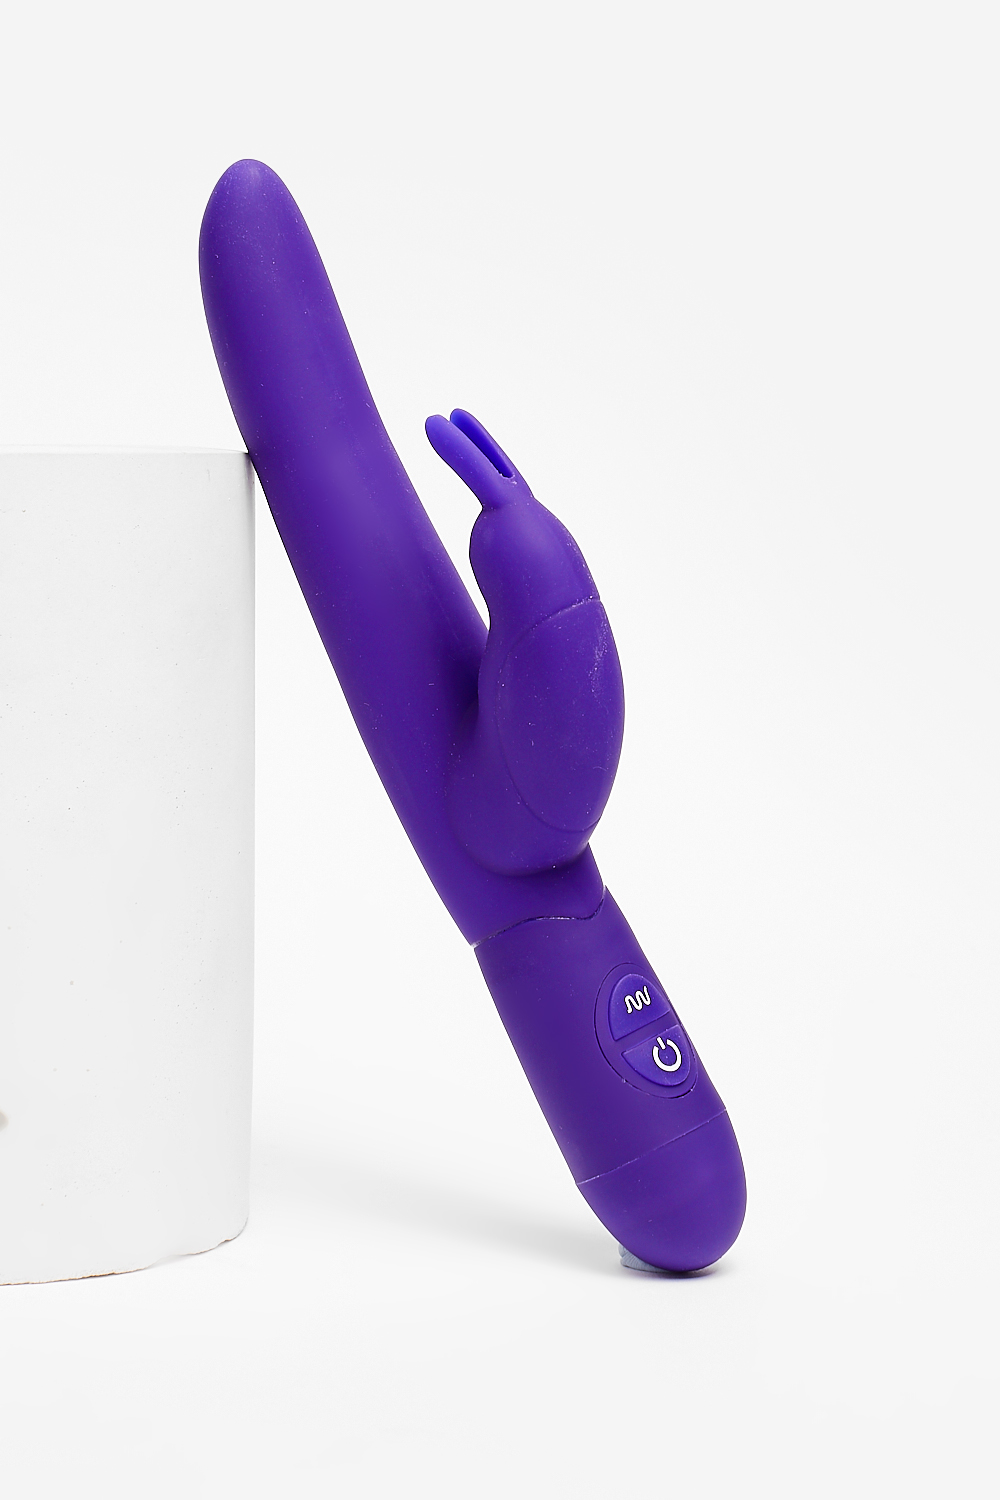 Shaft And Clitoral Vibrator 